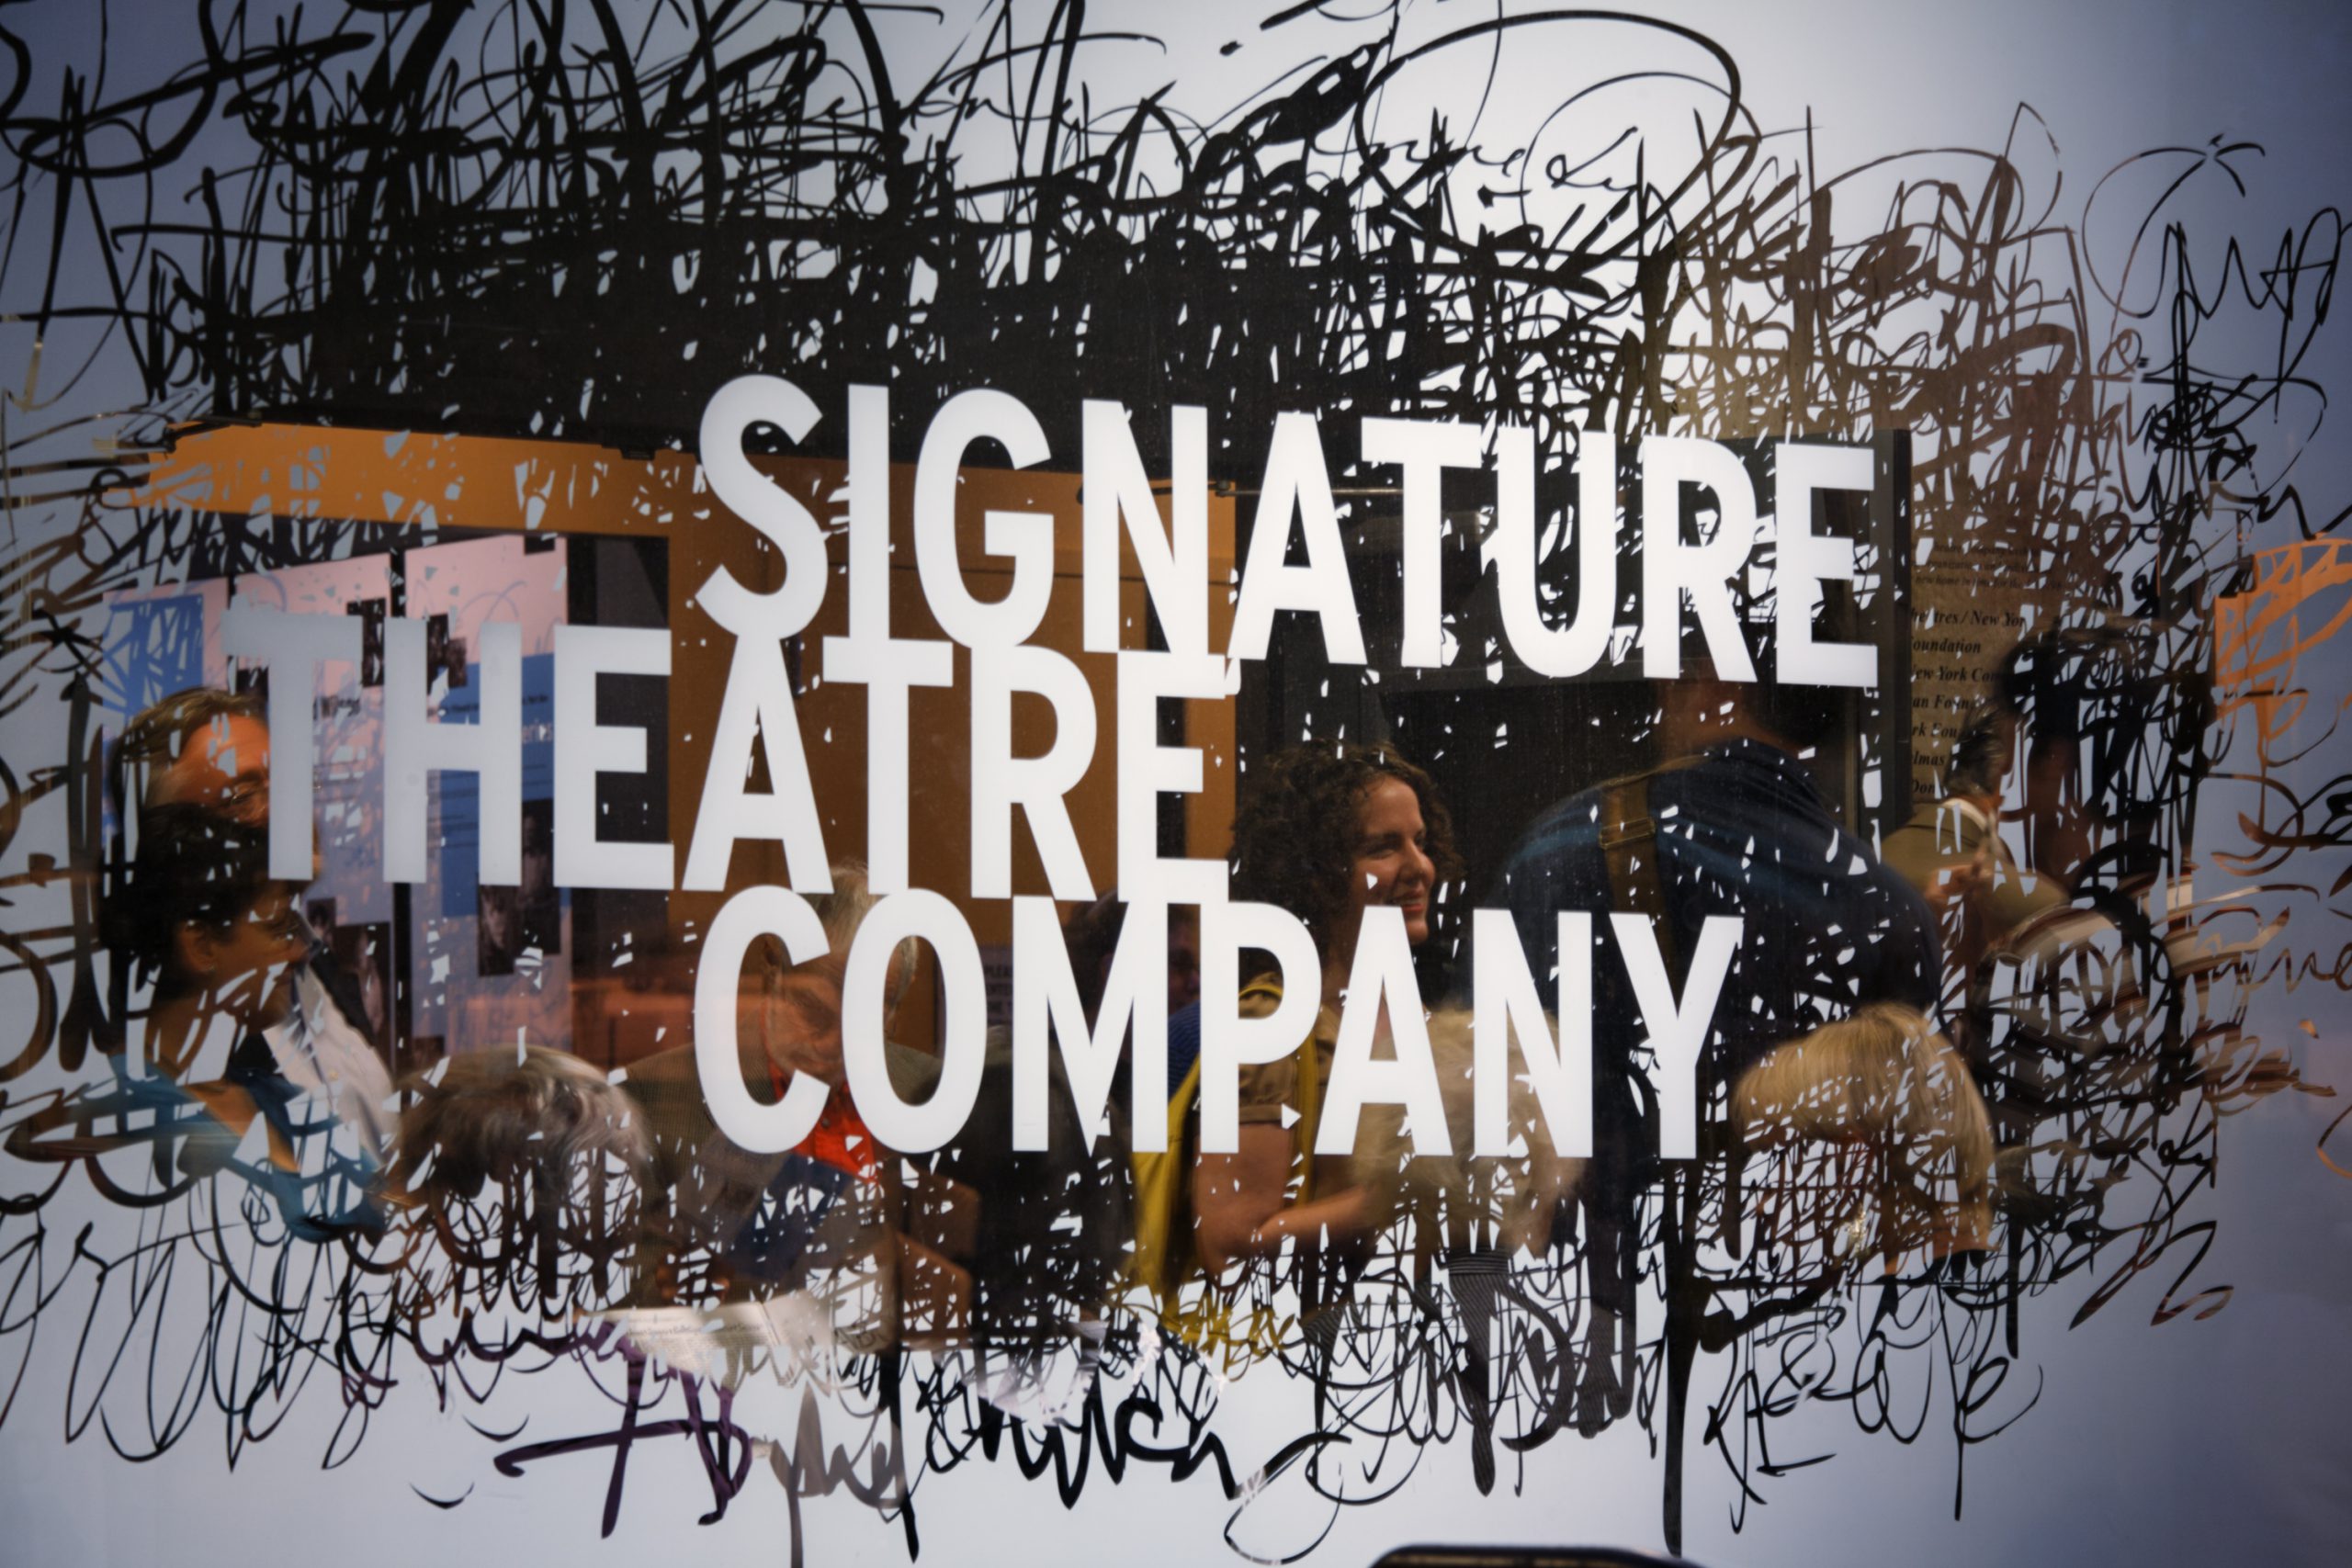 Project image 4 for Signage, Signature Theatre Company